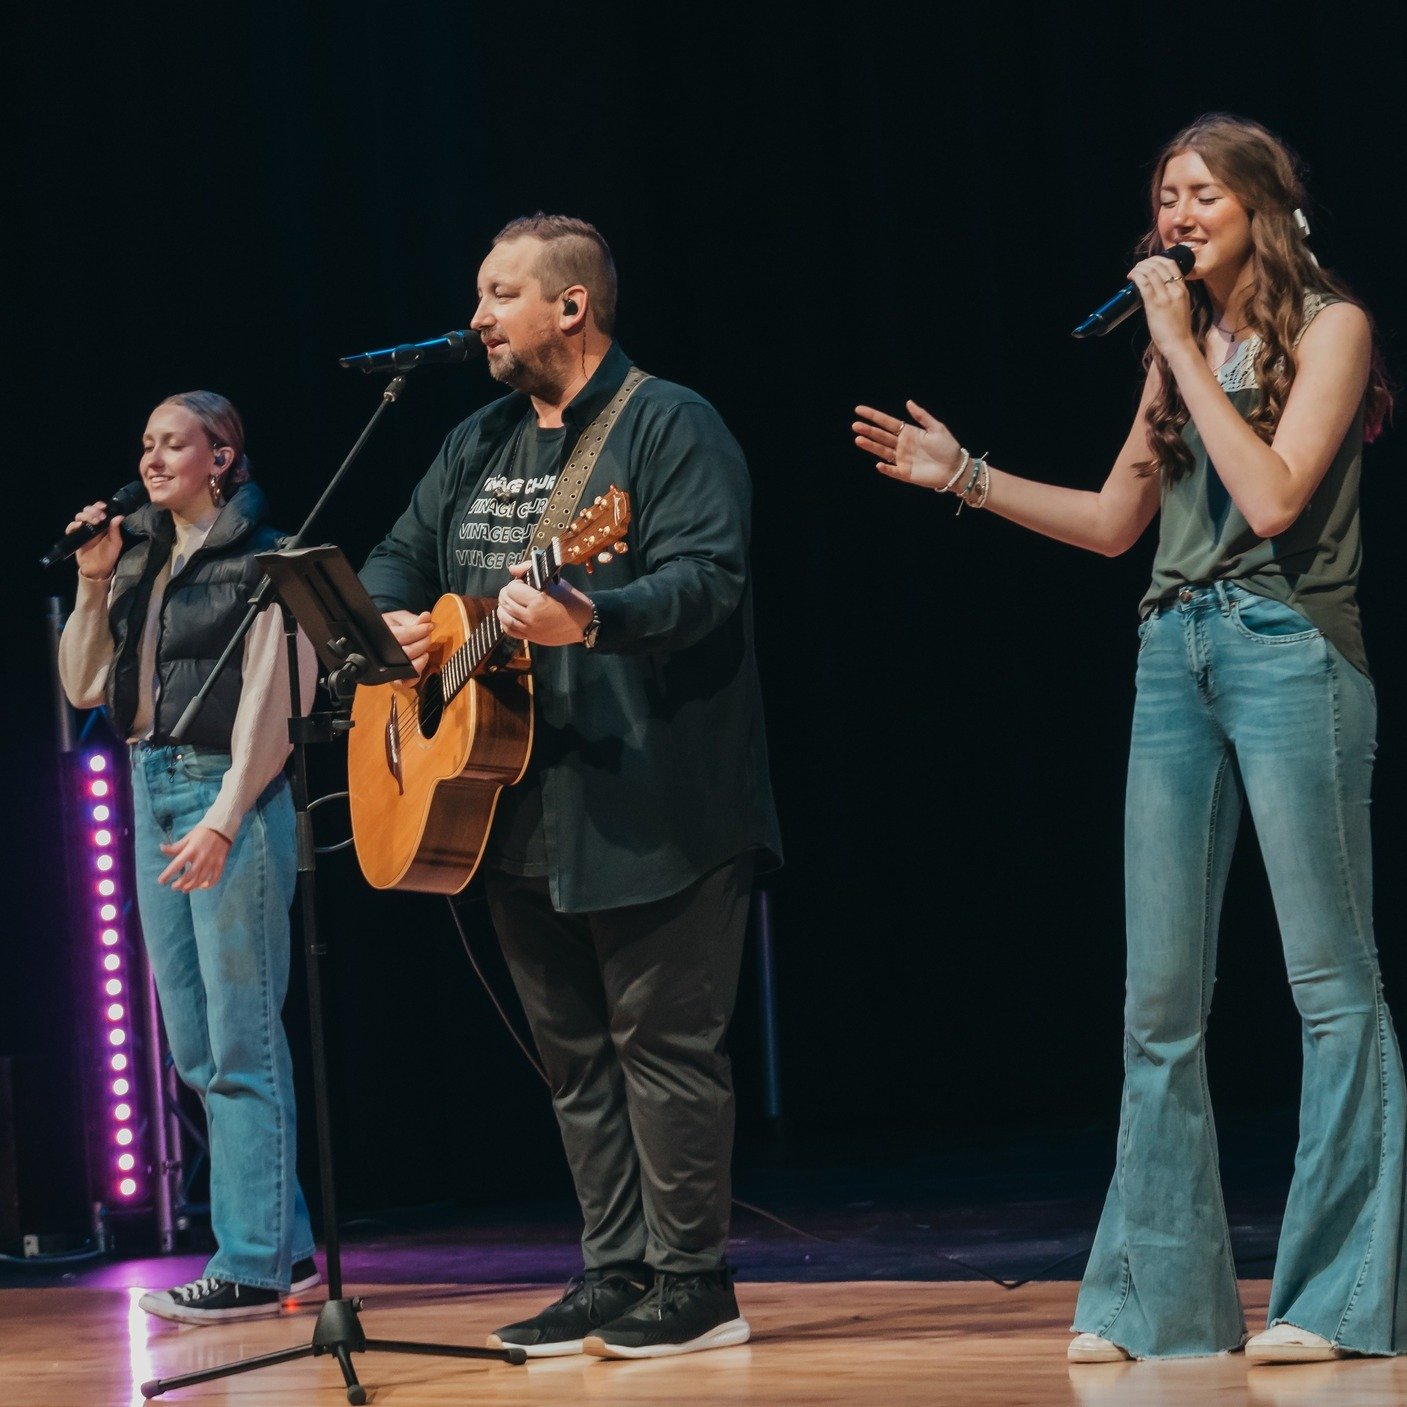 Another powerful Sunday! We learned how God fulfills us. He does that through our being connected to Him and to our church family. We are already looking forward to gathering again next week. Hope to see you there!